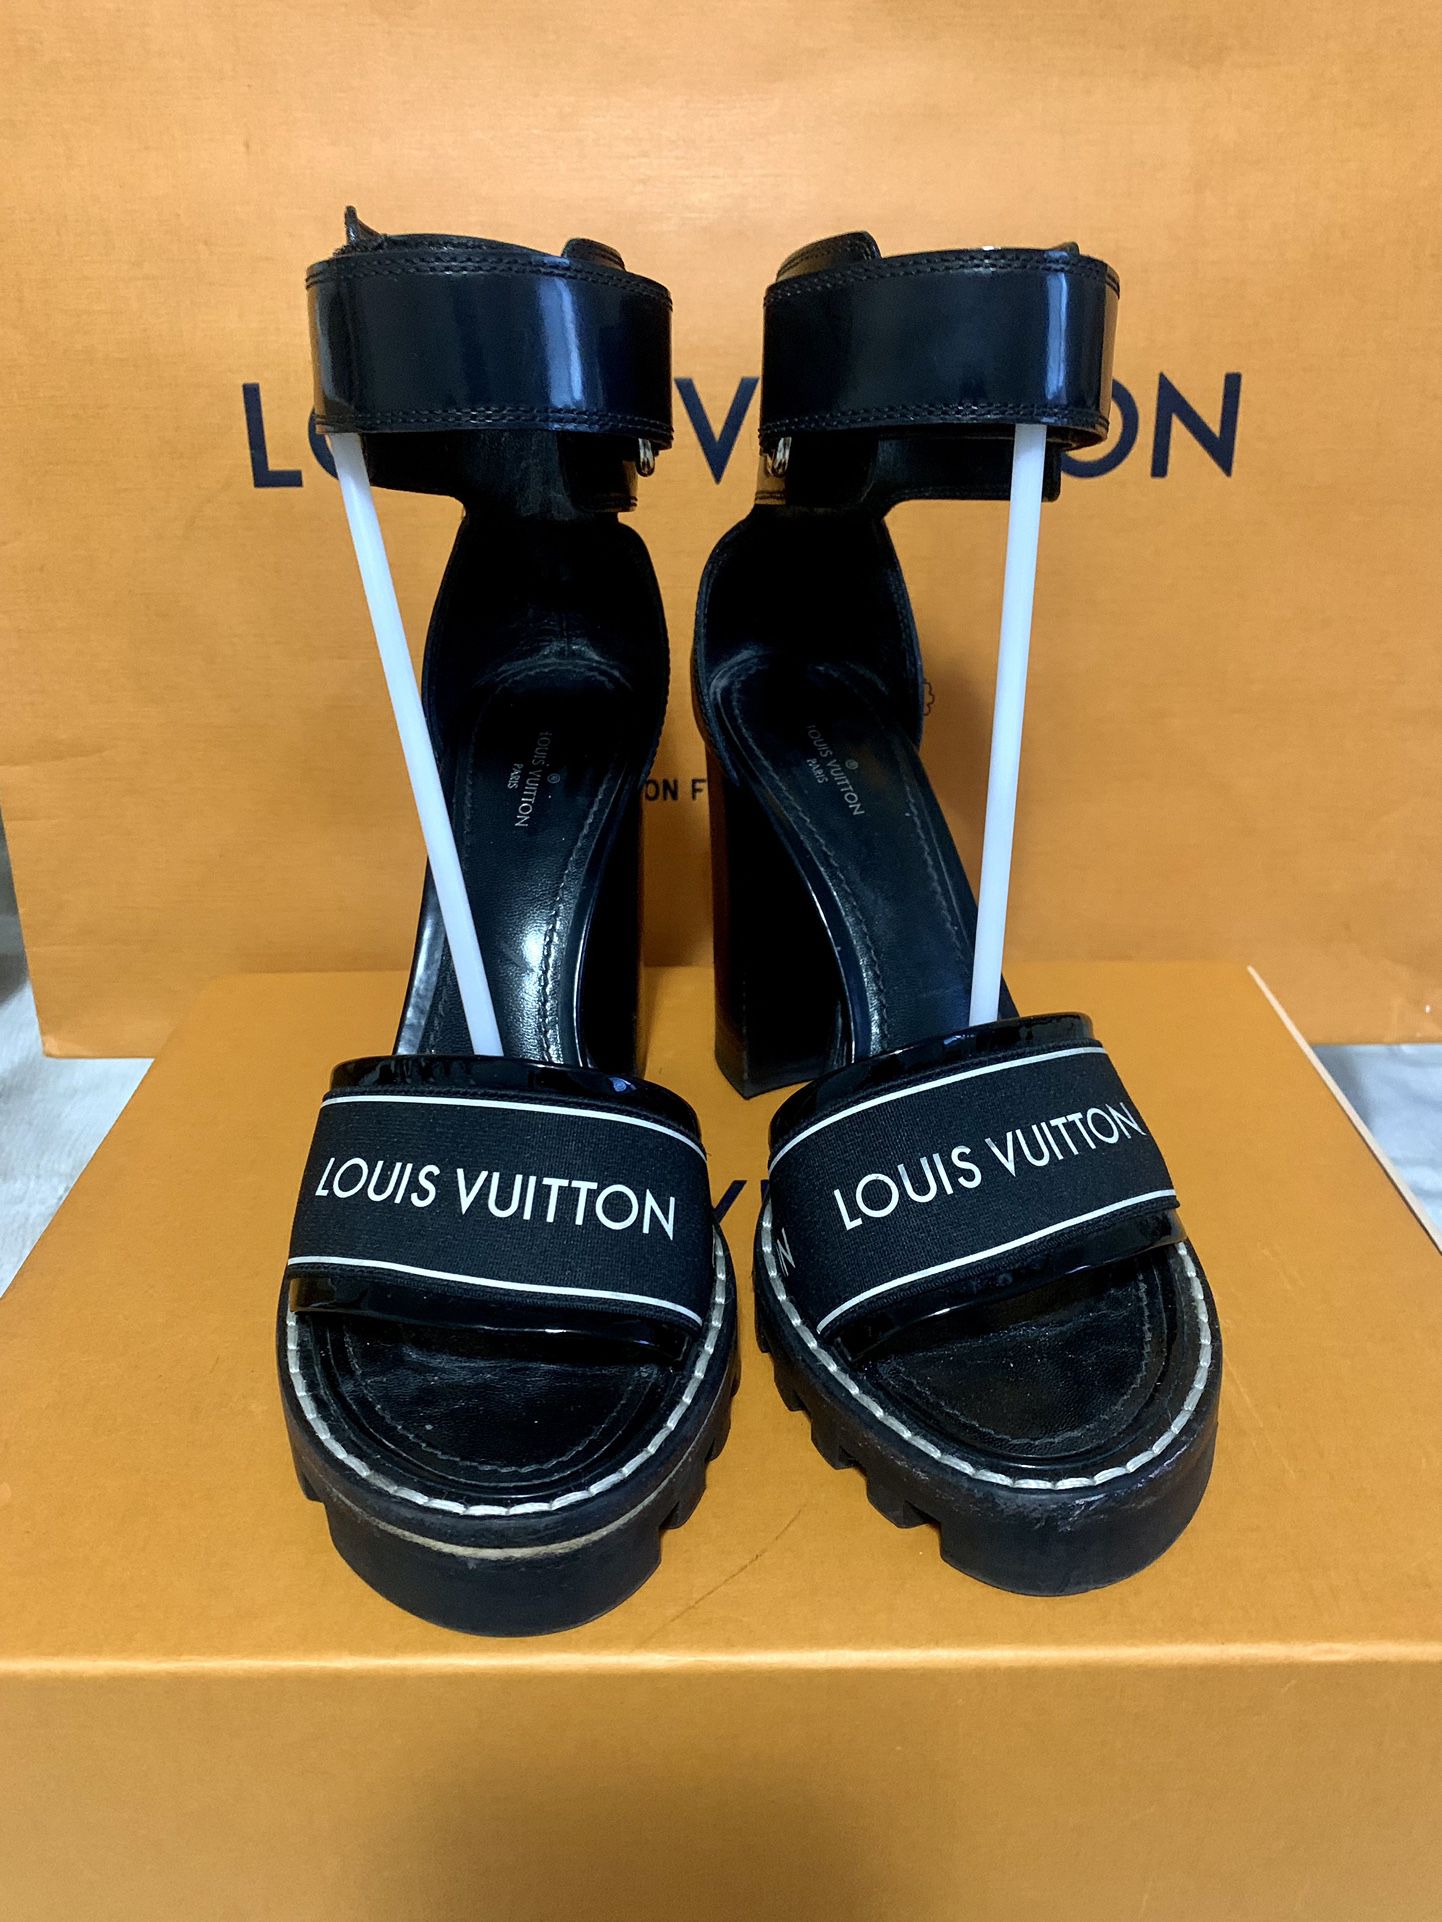 LOUIS VUITTON, Sandal Star Trail, sandals with monogram patterned  leather. Vintage clothing & Accessories - Auctionet